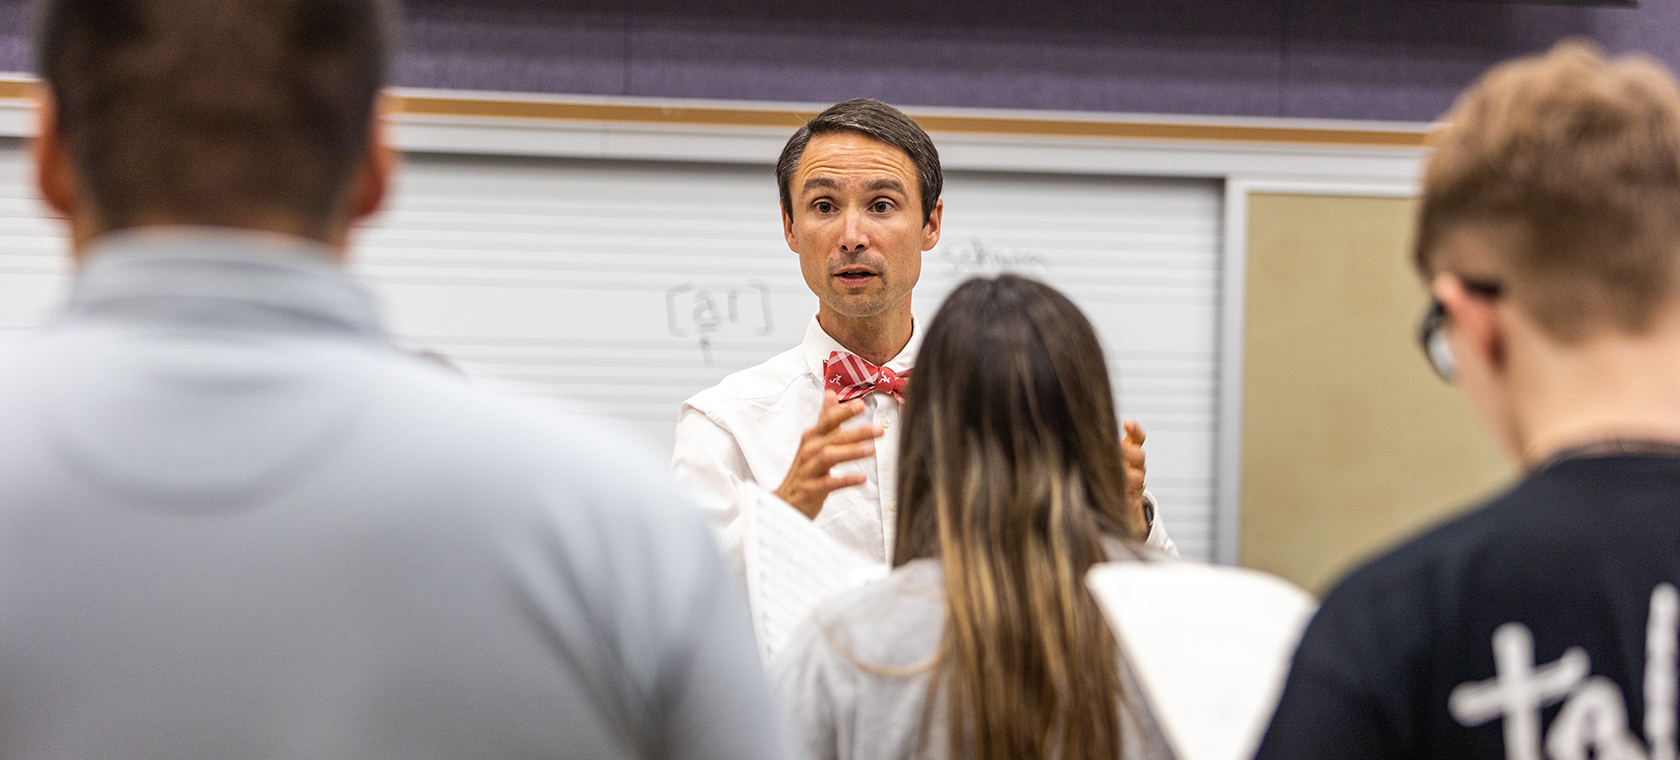 Faculty Connections are made in the music major.